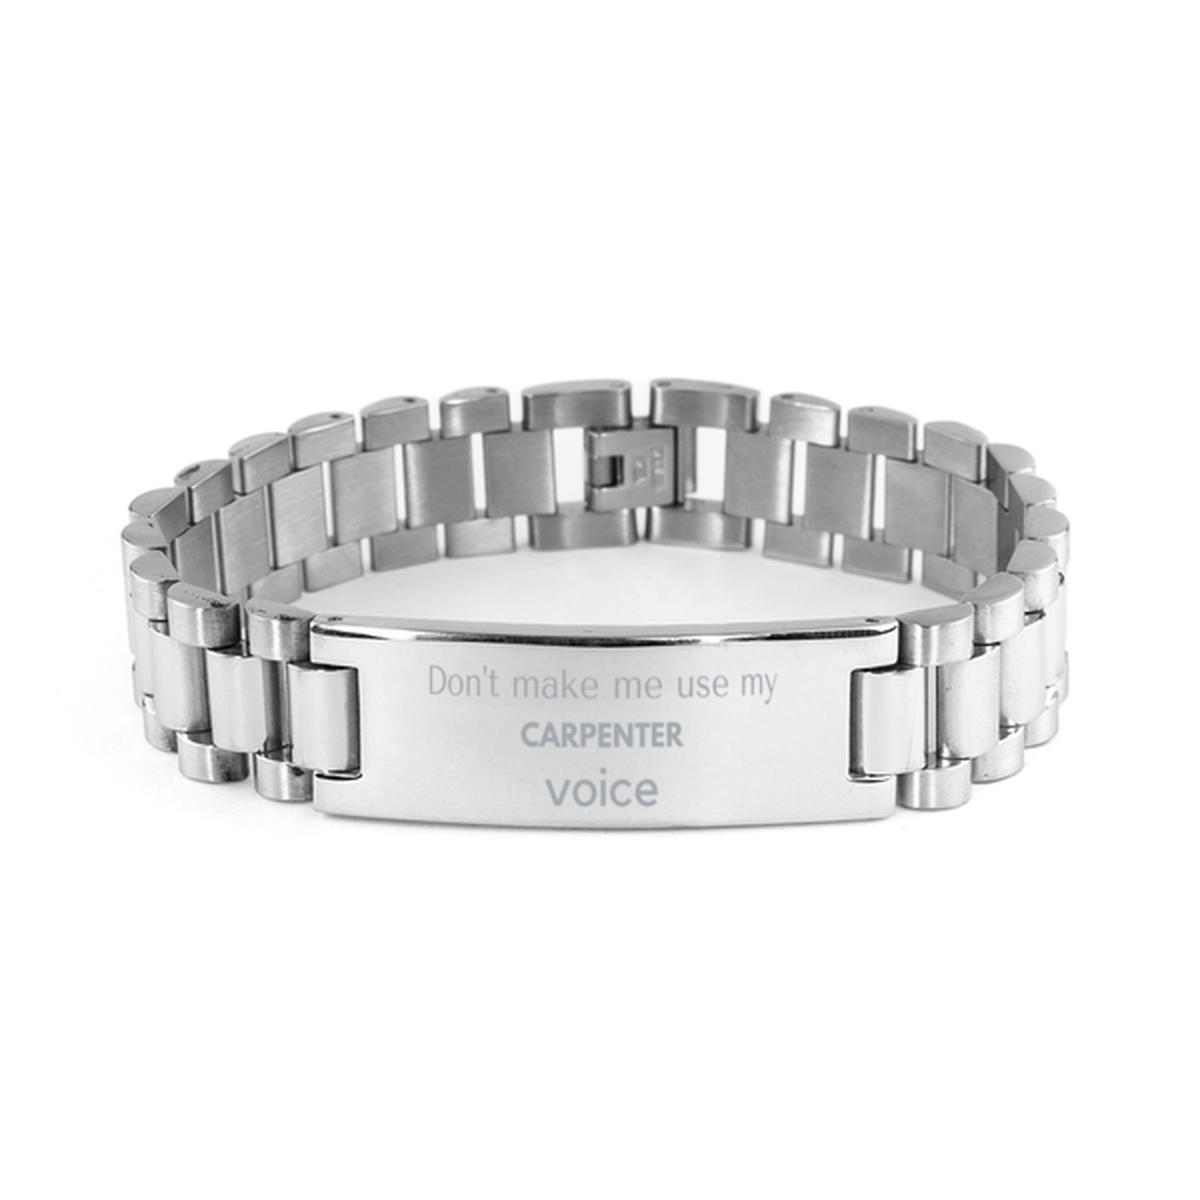 Don't make me use my Carpenter voice, Sarcasm Carpenter Gifts, Christmas Carpenter Ladder Stainless Steel Bracelet Birthday Unique Gifts For Carpenter Coworkers, Men, Women, Colleague, Friends